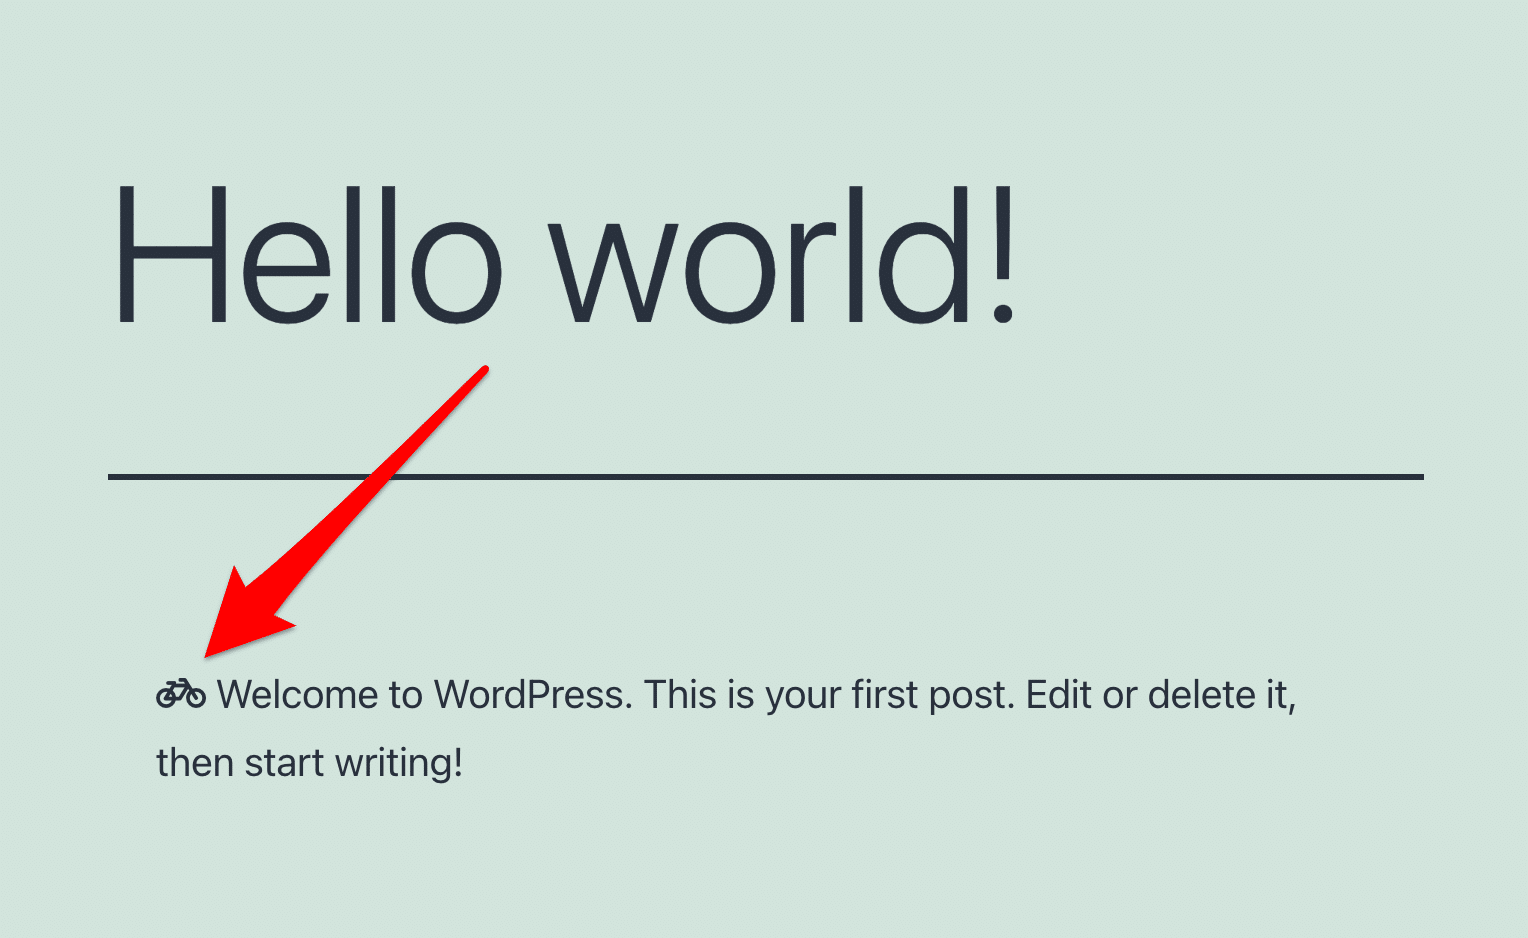 Integration of an icon font on WordPress.